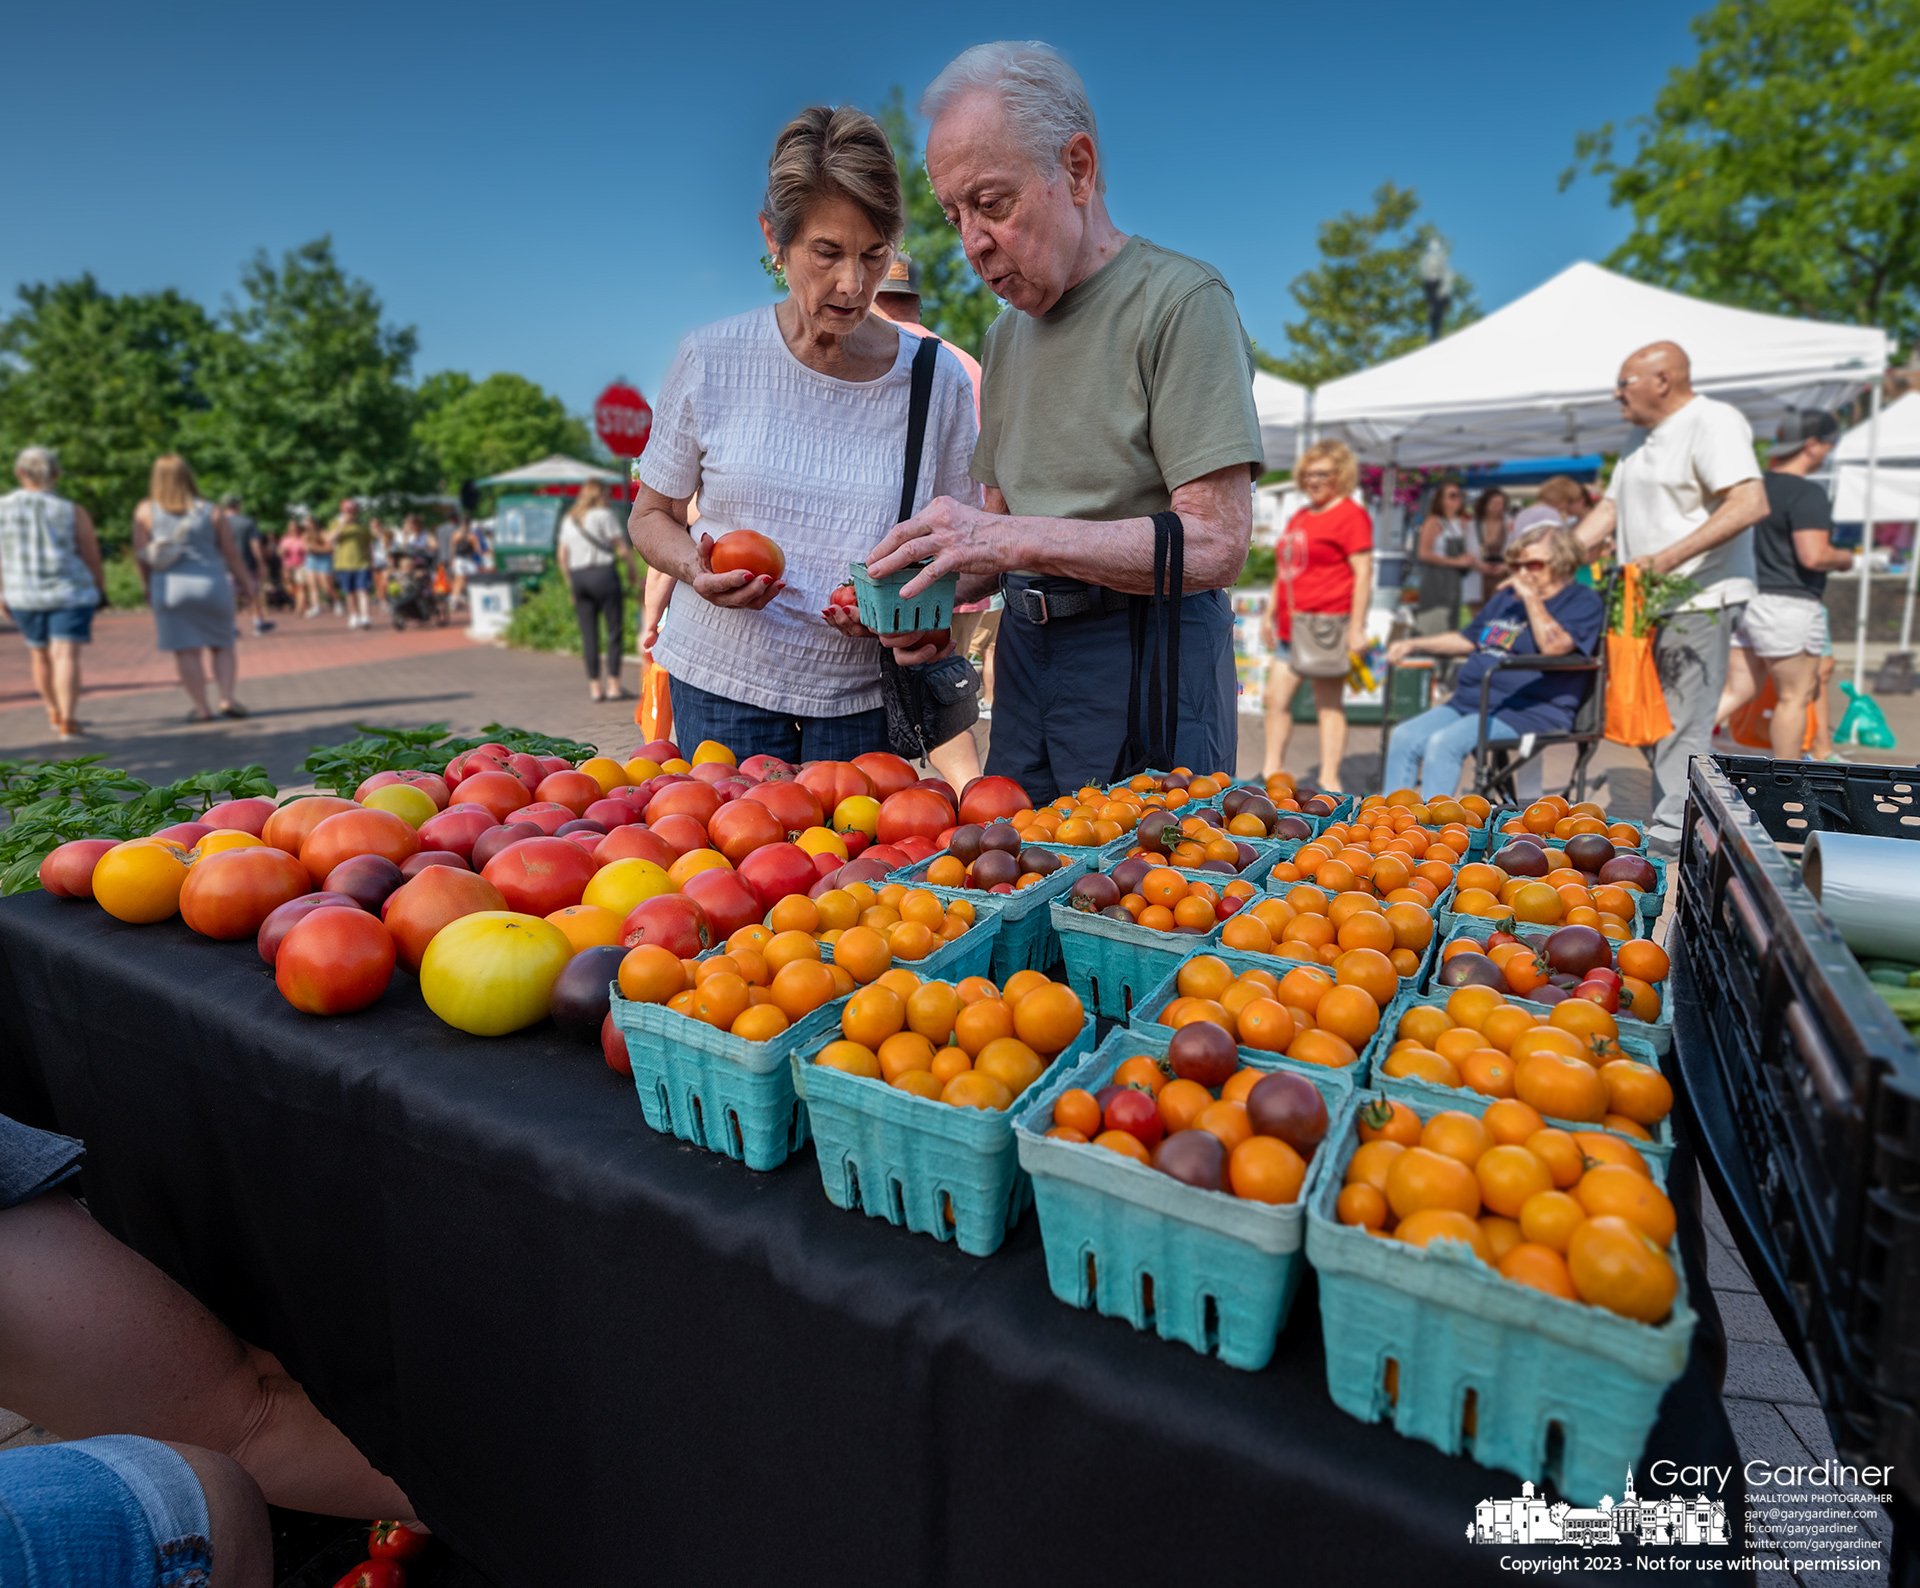 A couple compares their choices of tomatoes from a produce farm at the Saturday Market in Uptown Westerville. My Final Photo for July 22, 2023.